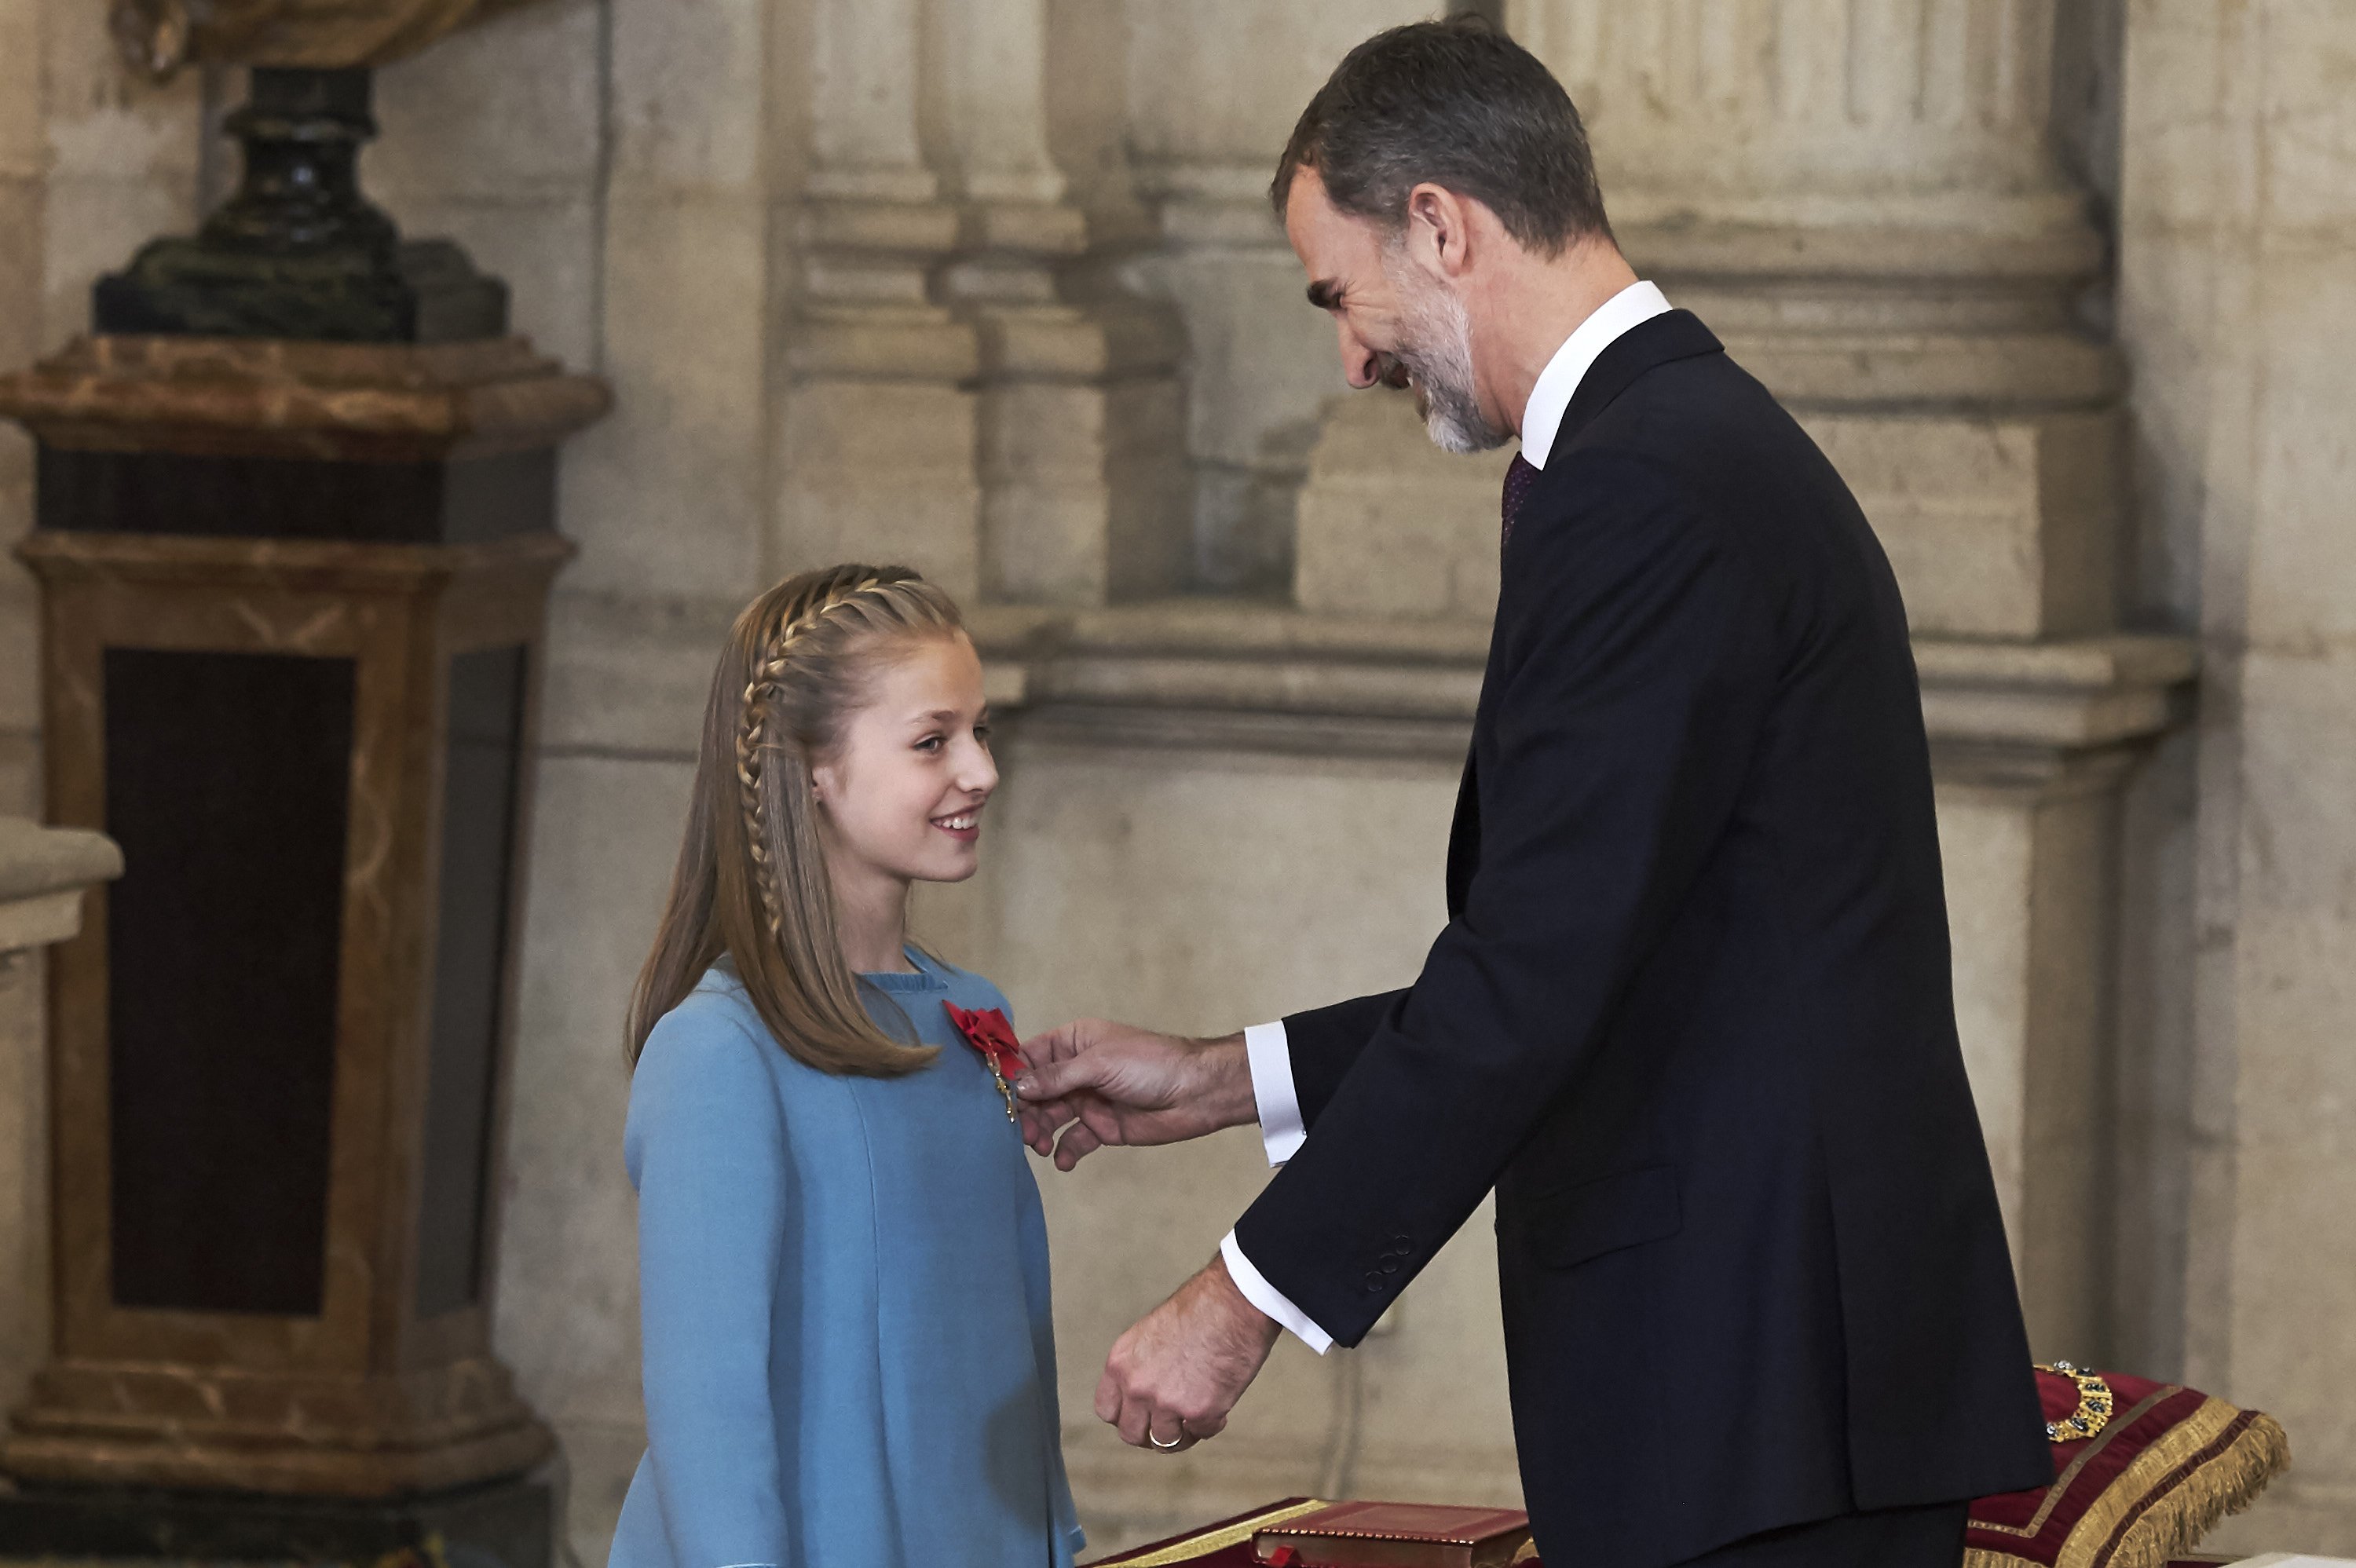 Princess Leonor of Spain receives the Order of Golden Fleece (Toison de Oro) from King Felipe VI of Spain on January 30, 2018, in Madrid, Spain | Source: Getty Images